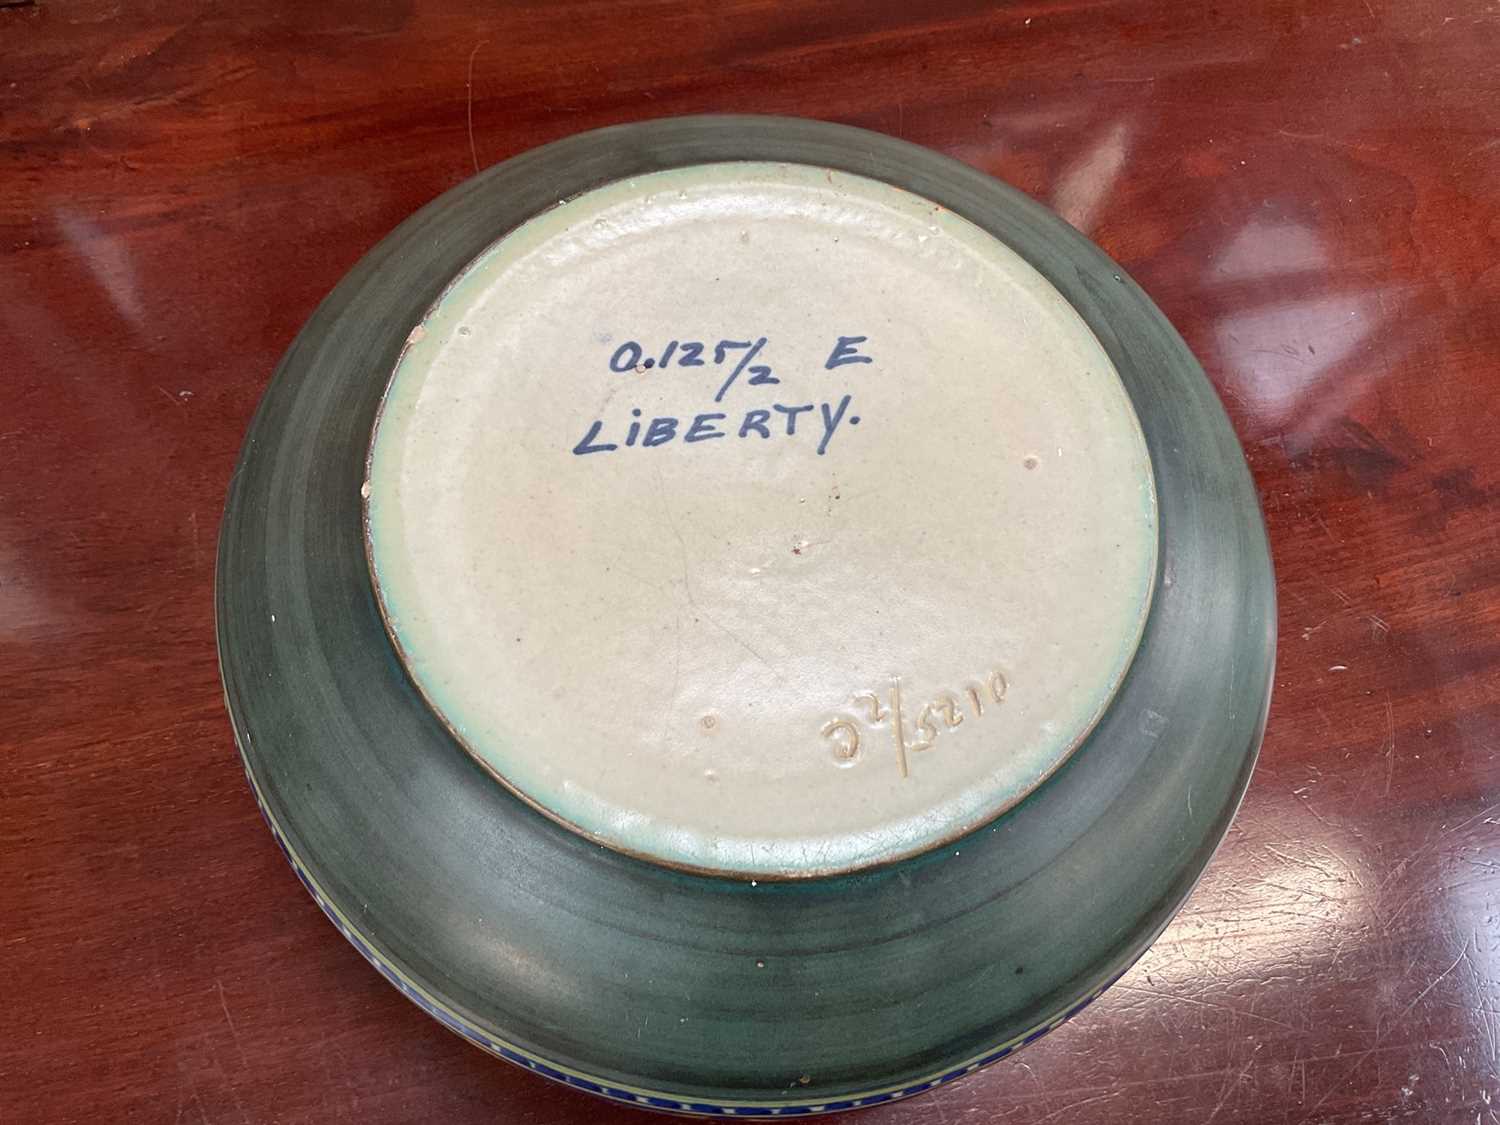 Liberty bowl by Gouda pottery for Liberty of London - Image 2 of 2